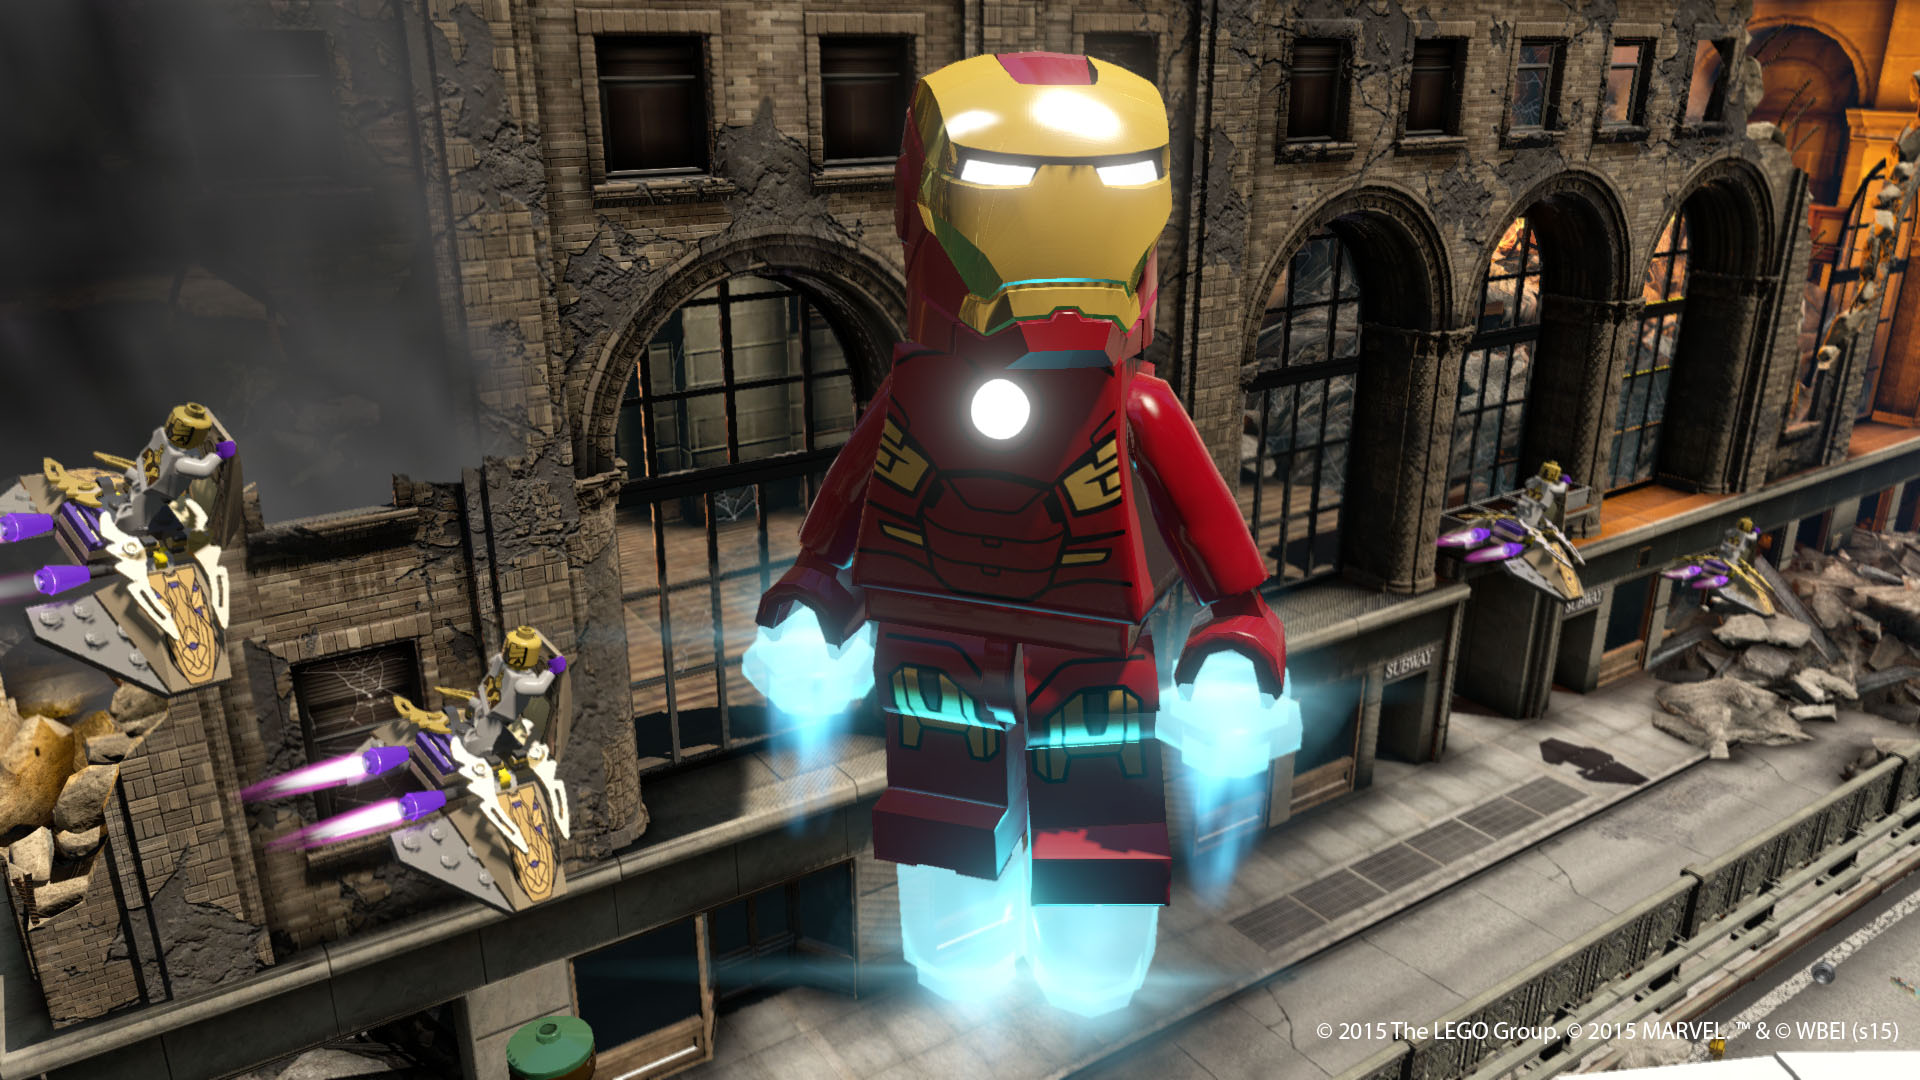 Game Informer has posted a new preview of LEGO Marvel’s Avengers 